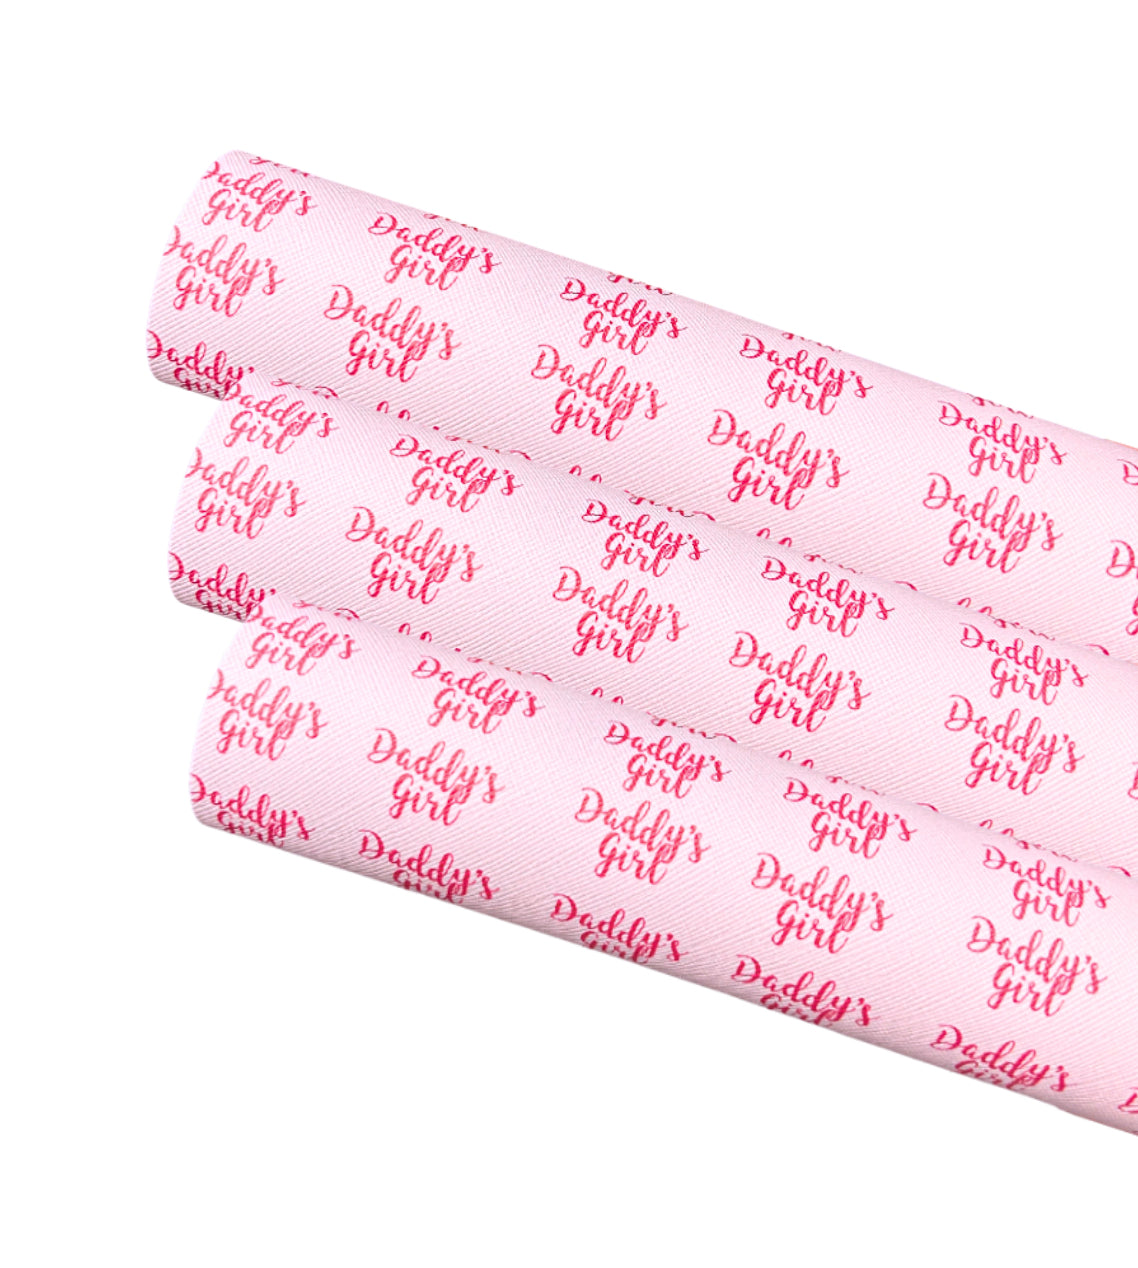 Daddys girl  printed leatherette fabric Pink